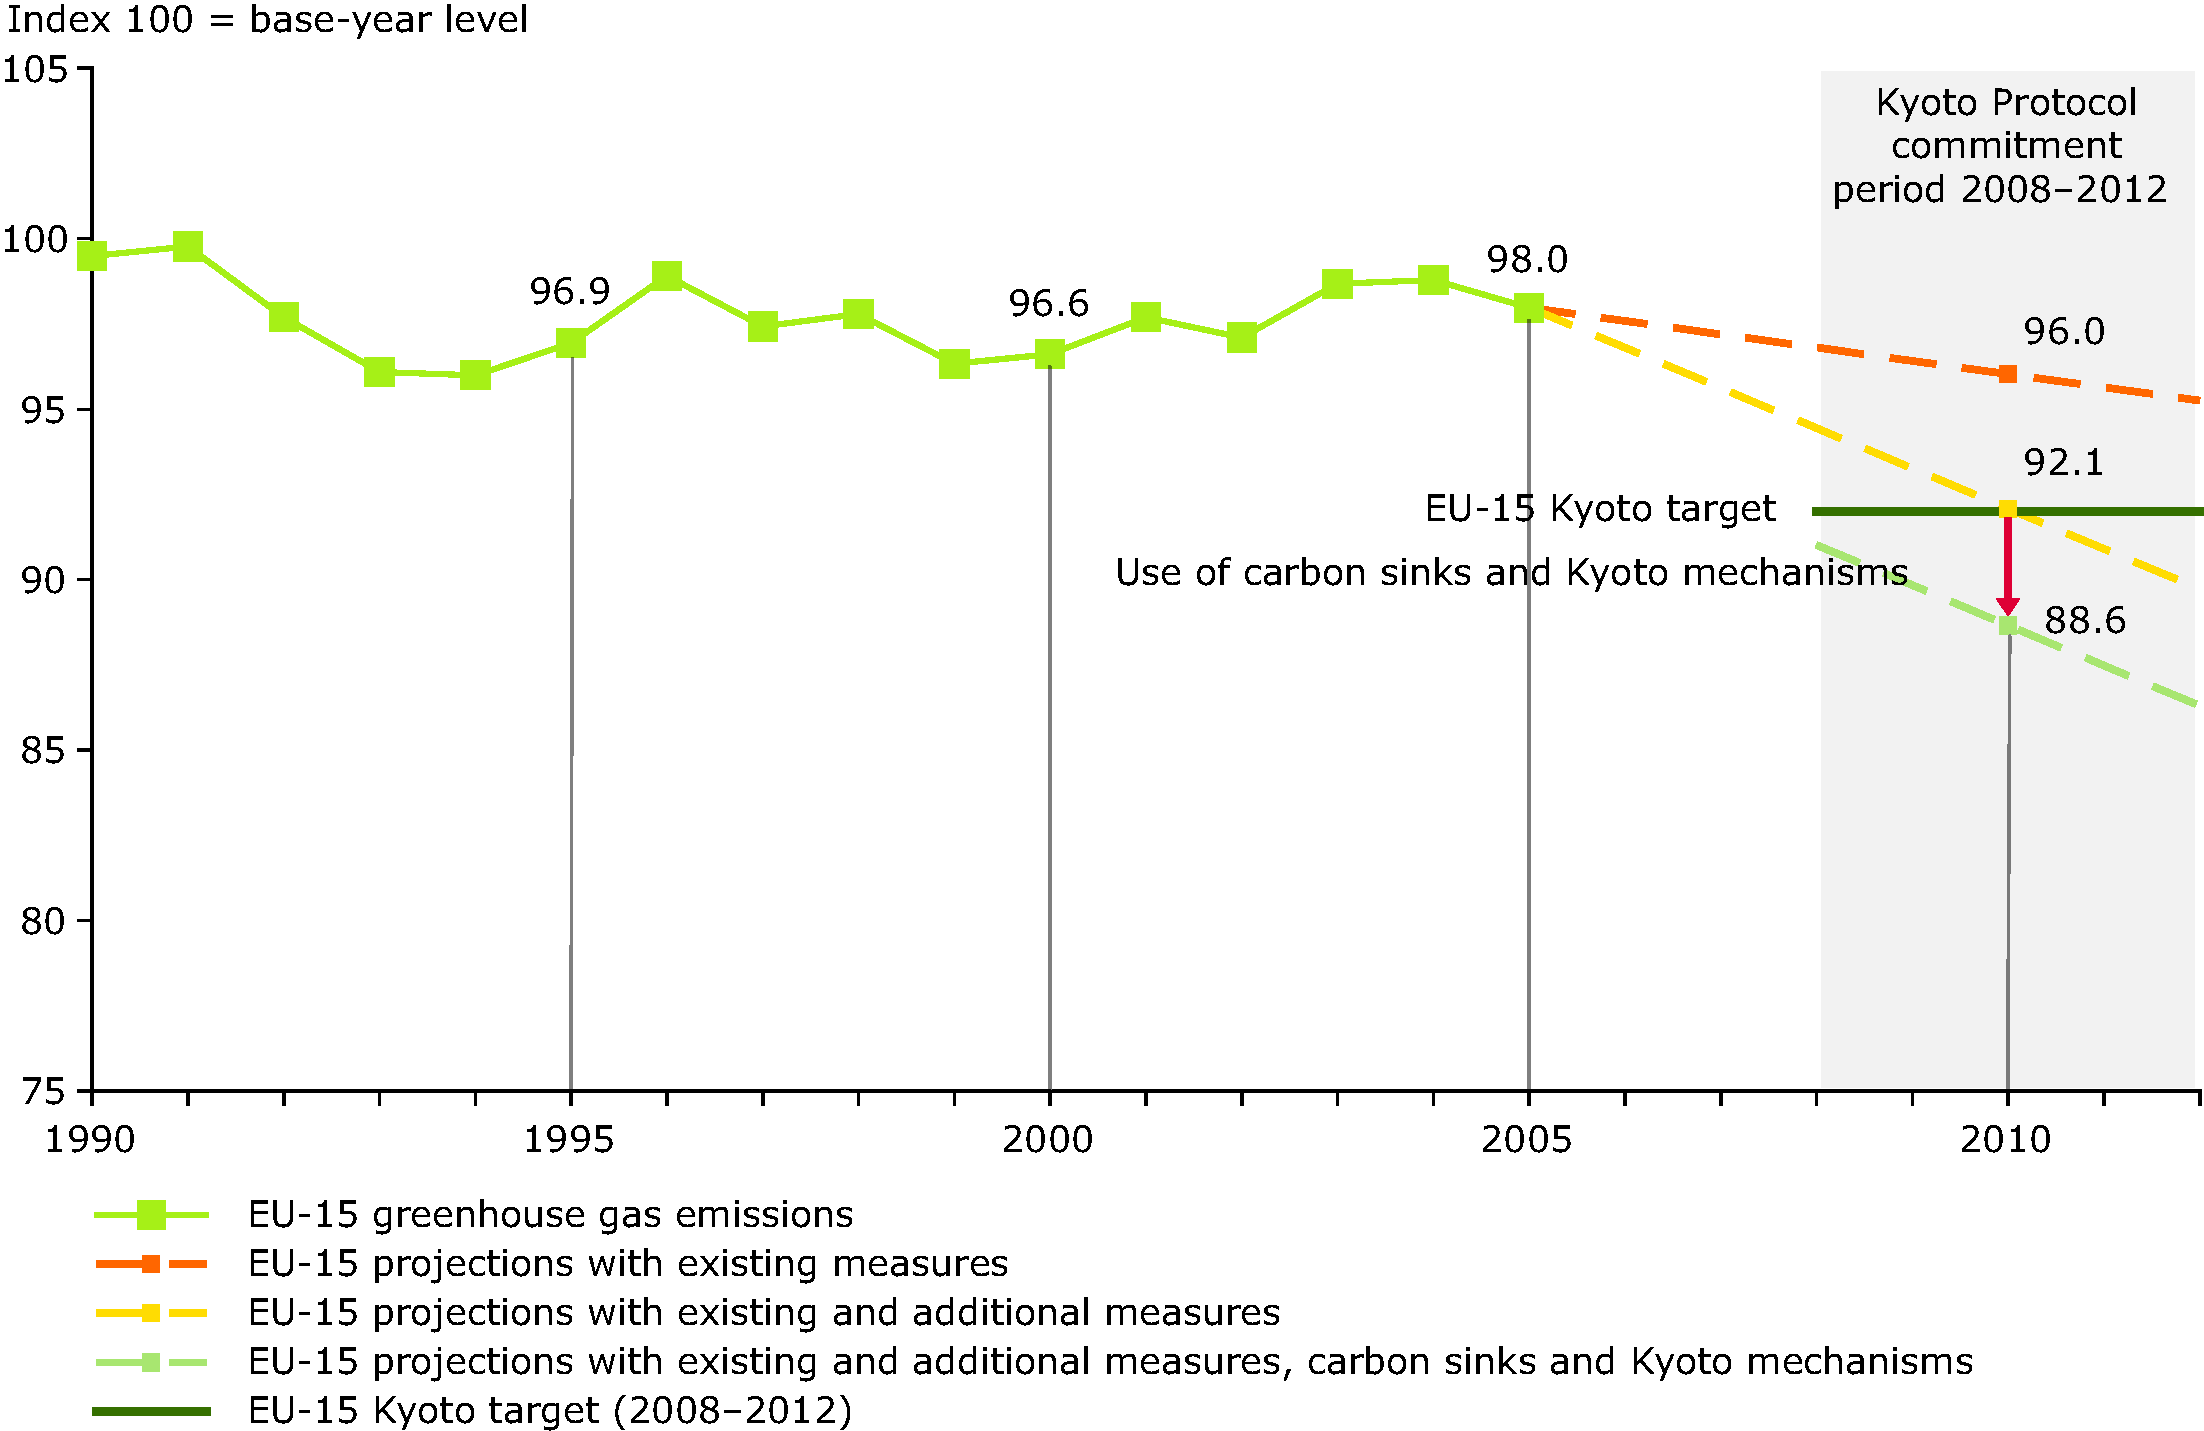 Past and projected EU-15 greenhouse gas emissions compared with Kyoto target for 2008-2012